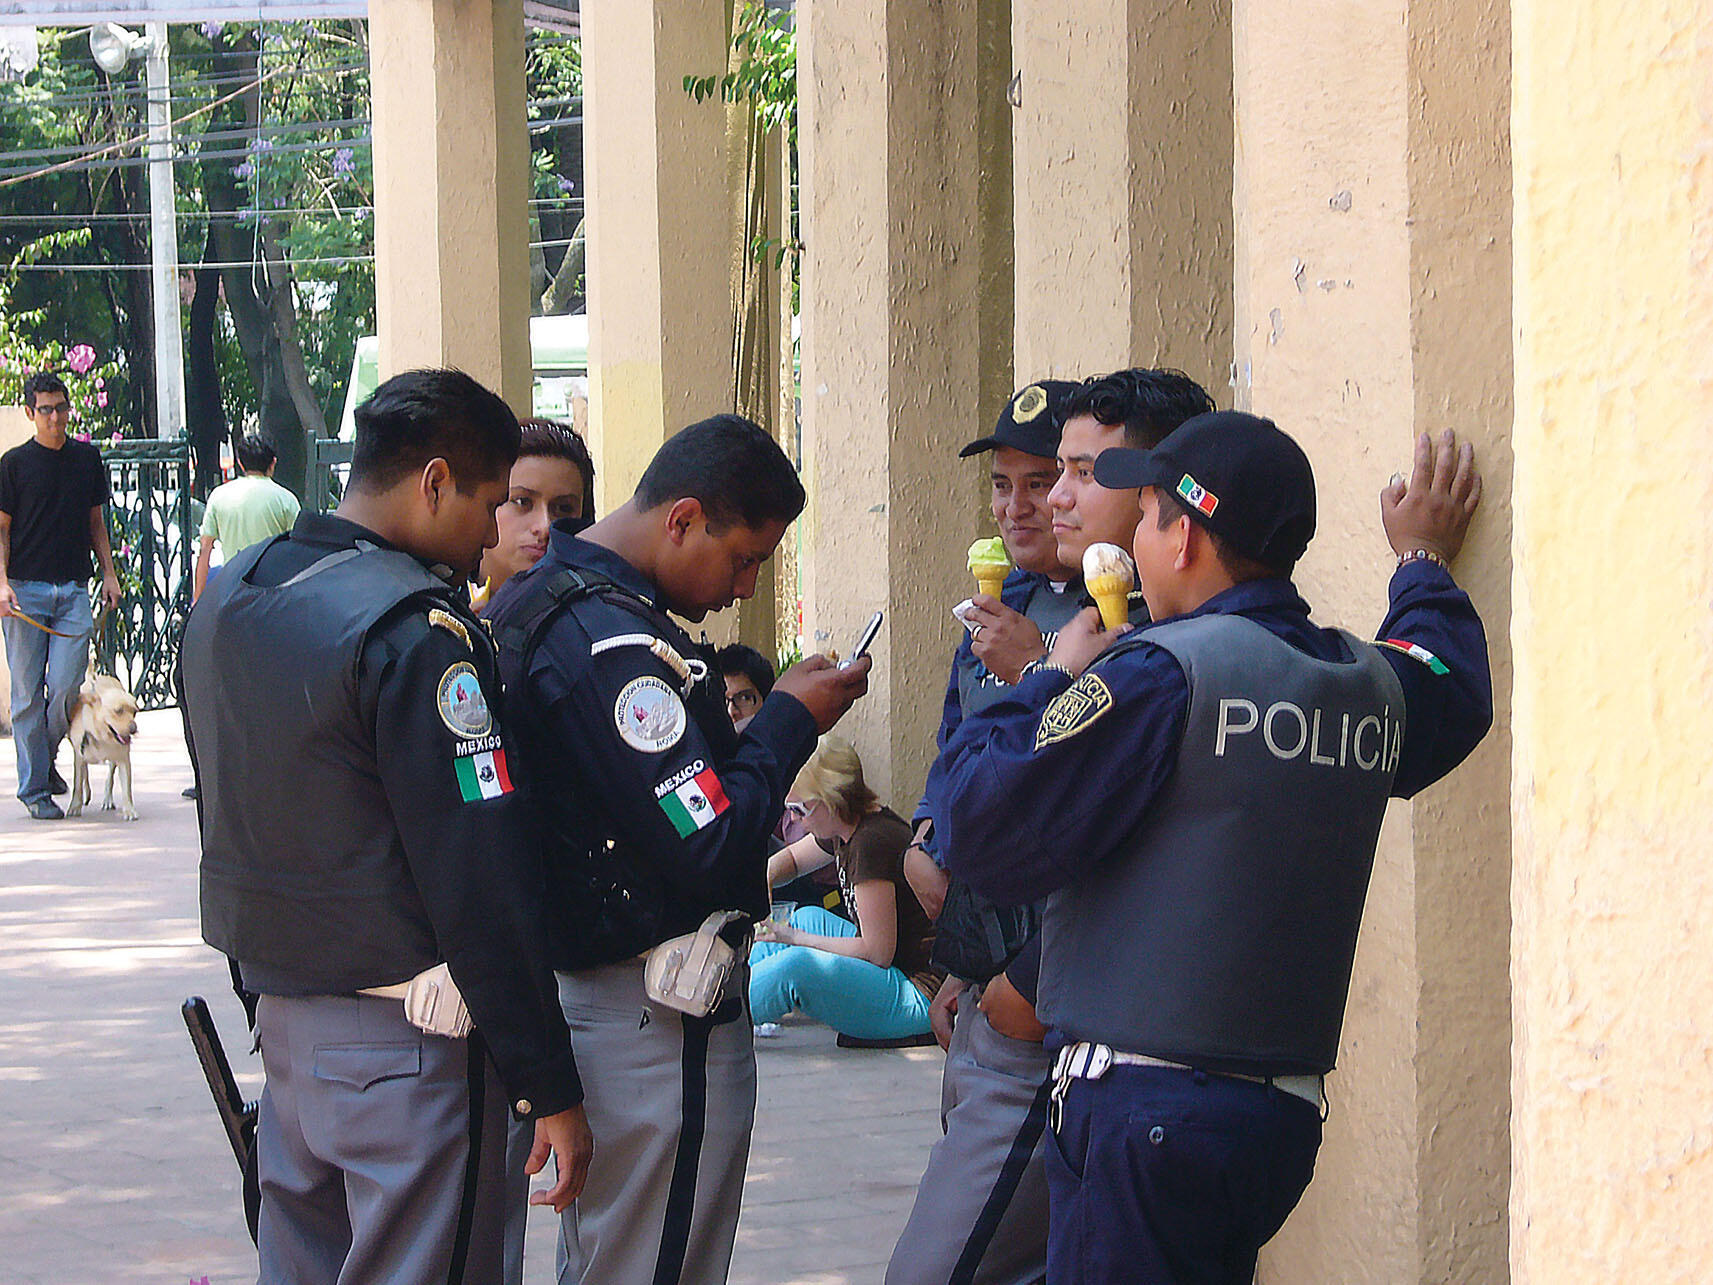  Mexican police often expect, as pictured here with ice cream, free goods from local merchants. (Photo by Alan Zabicky.)